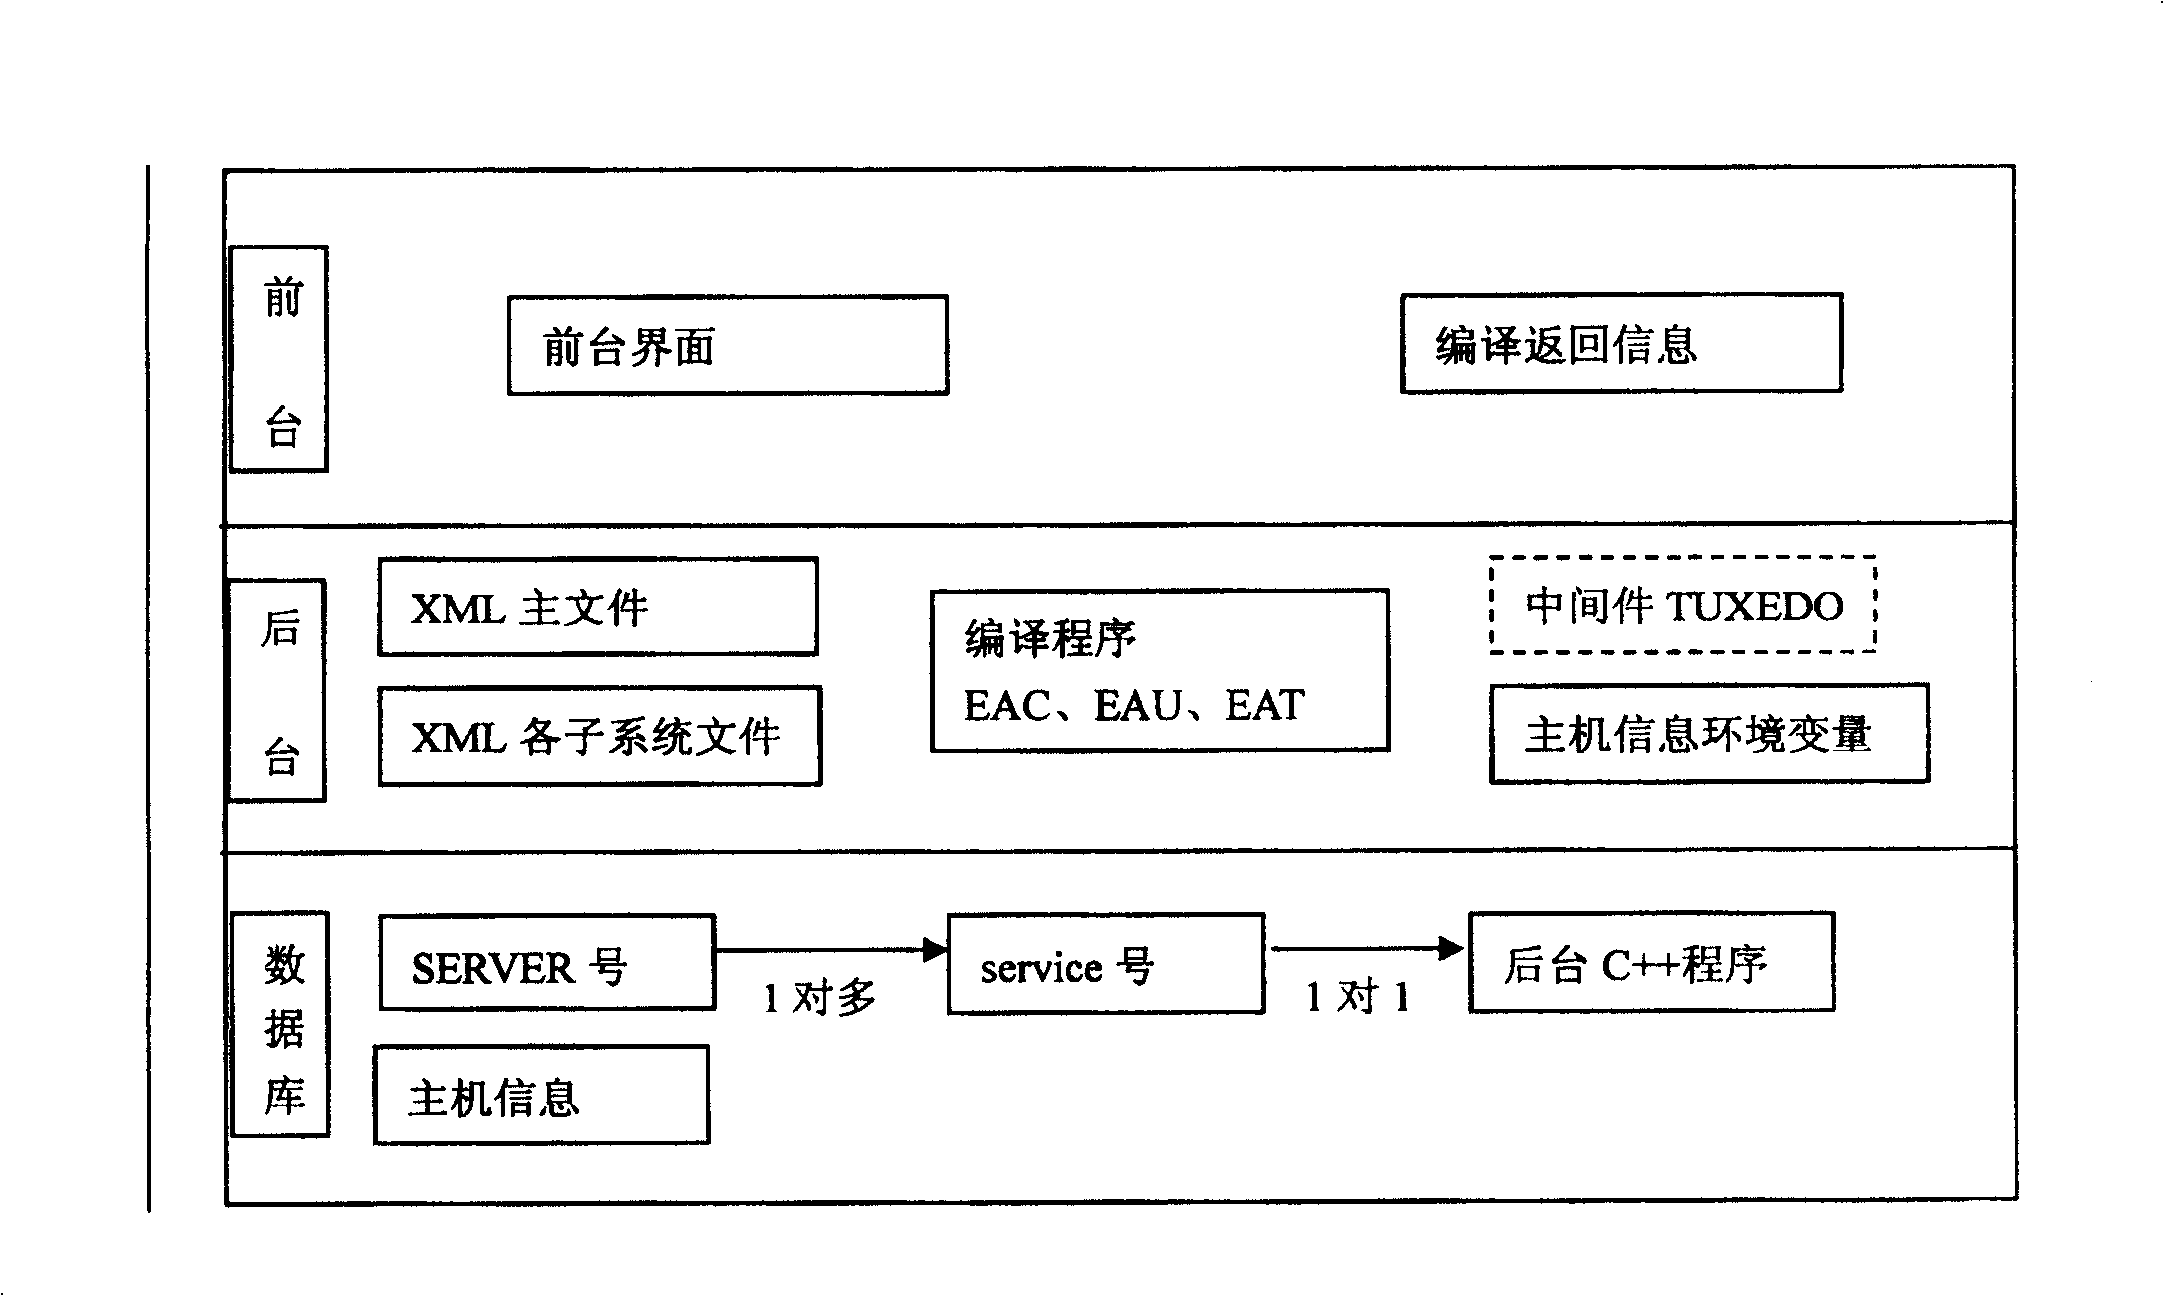 Method for realizing integrated translate and edit surroundings under three layers structure